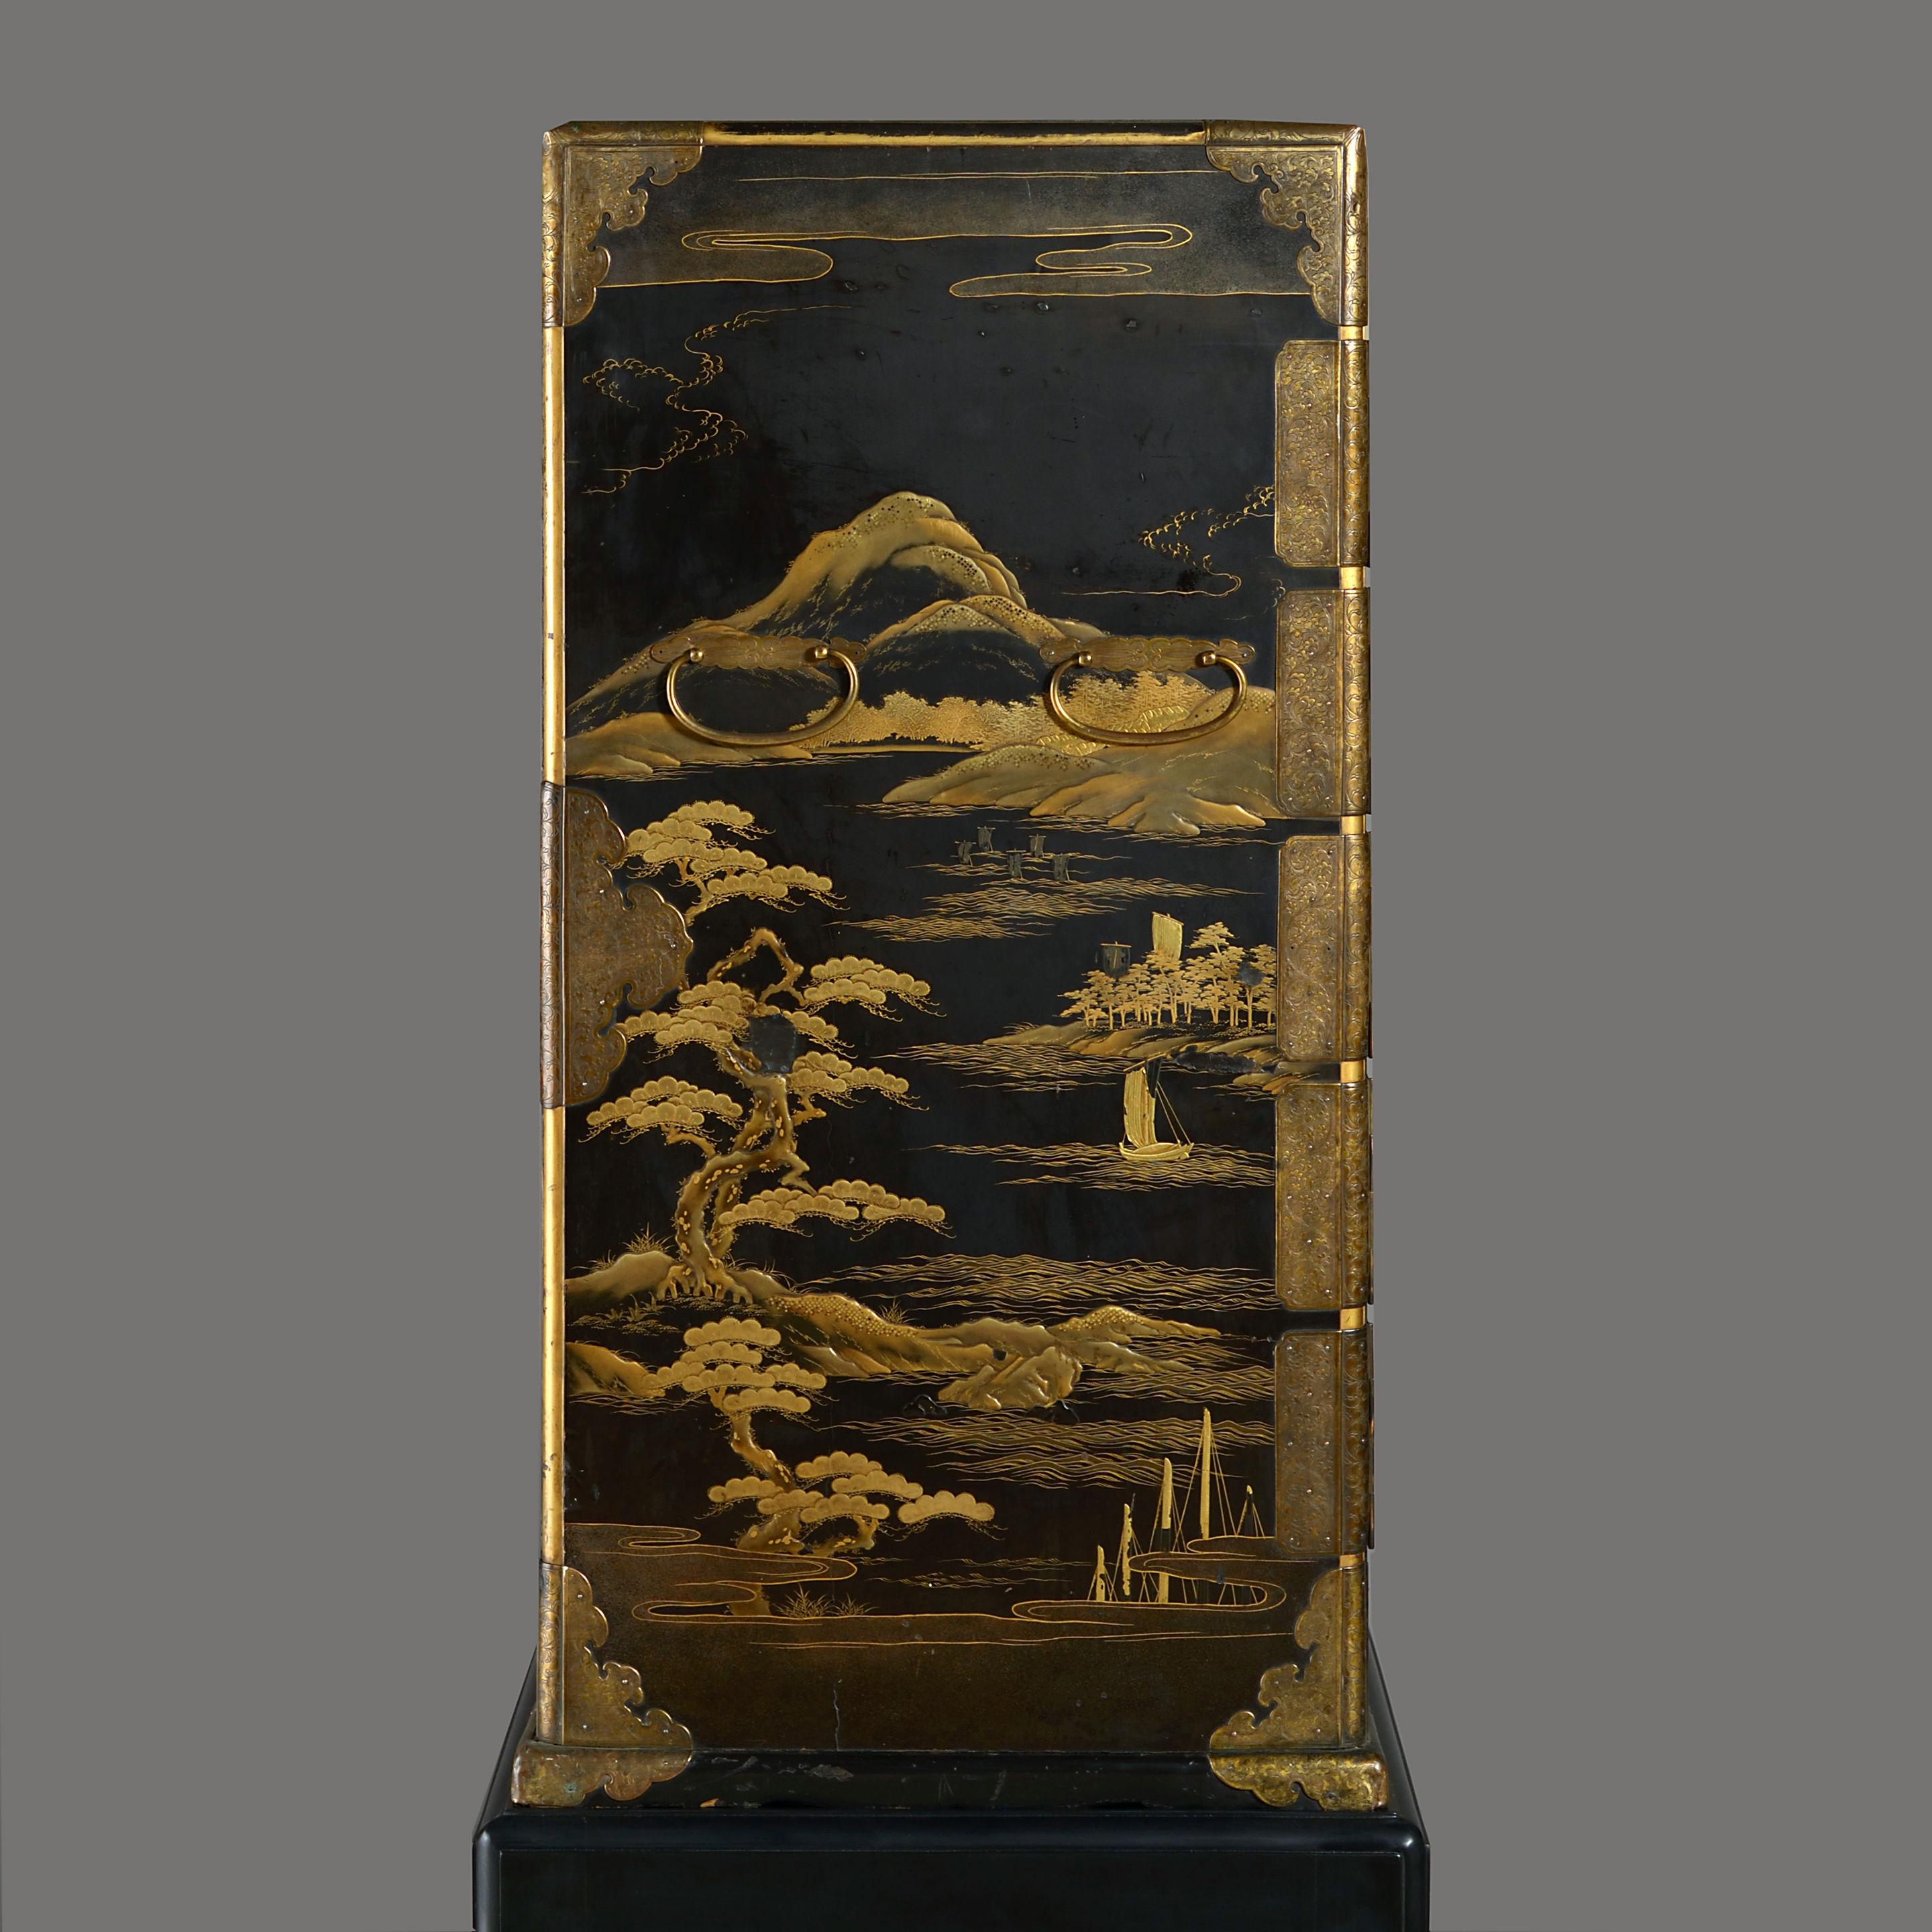 Mid-19th Century An Early 19th Century Lacquer Cabinet on Stand